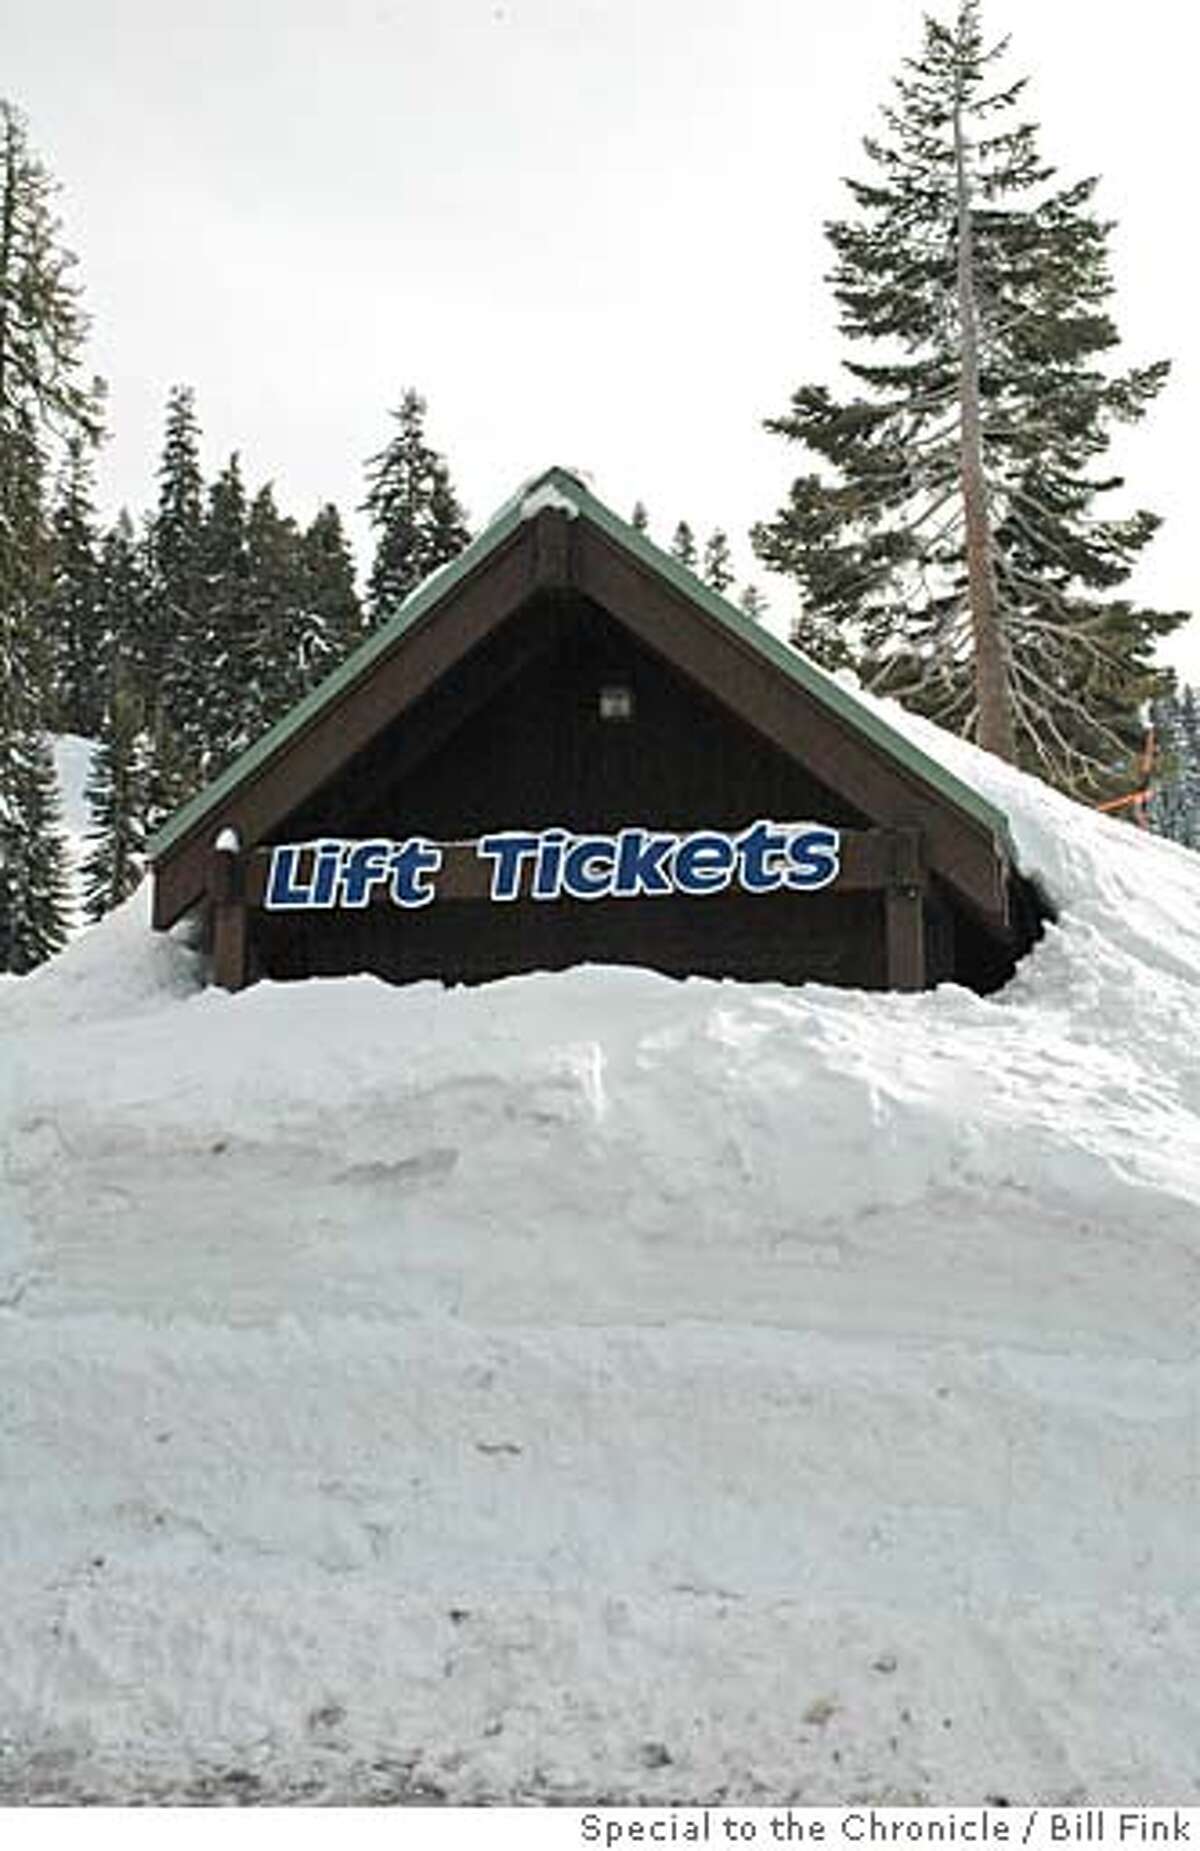 A photo of the Bear Valley lift ticket booth buried under 15 feet of snow. Photo credit: Bill Fink / Special to The Chronicle. ONE-TIME USE ONLY, SFGATE (IF ALSO IN PRINT) & BULLDOG OK.